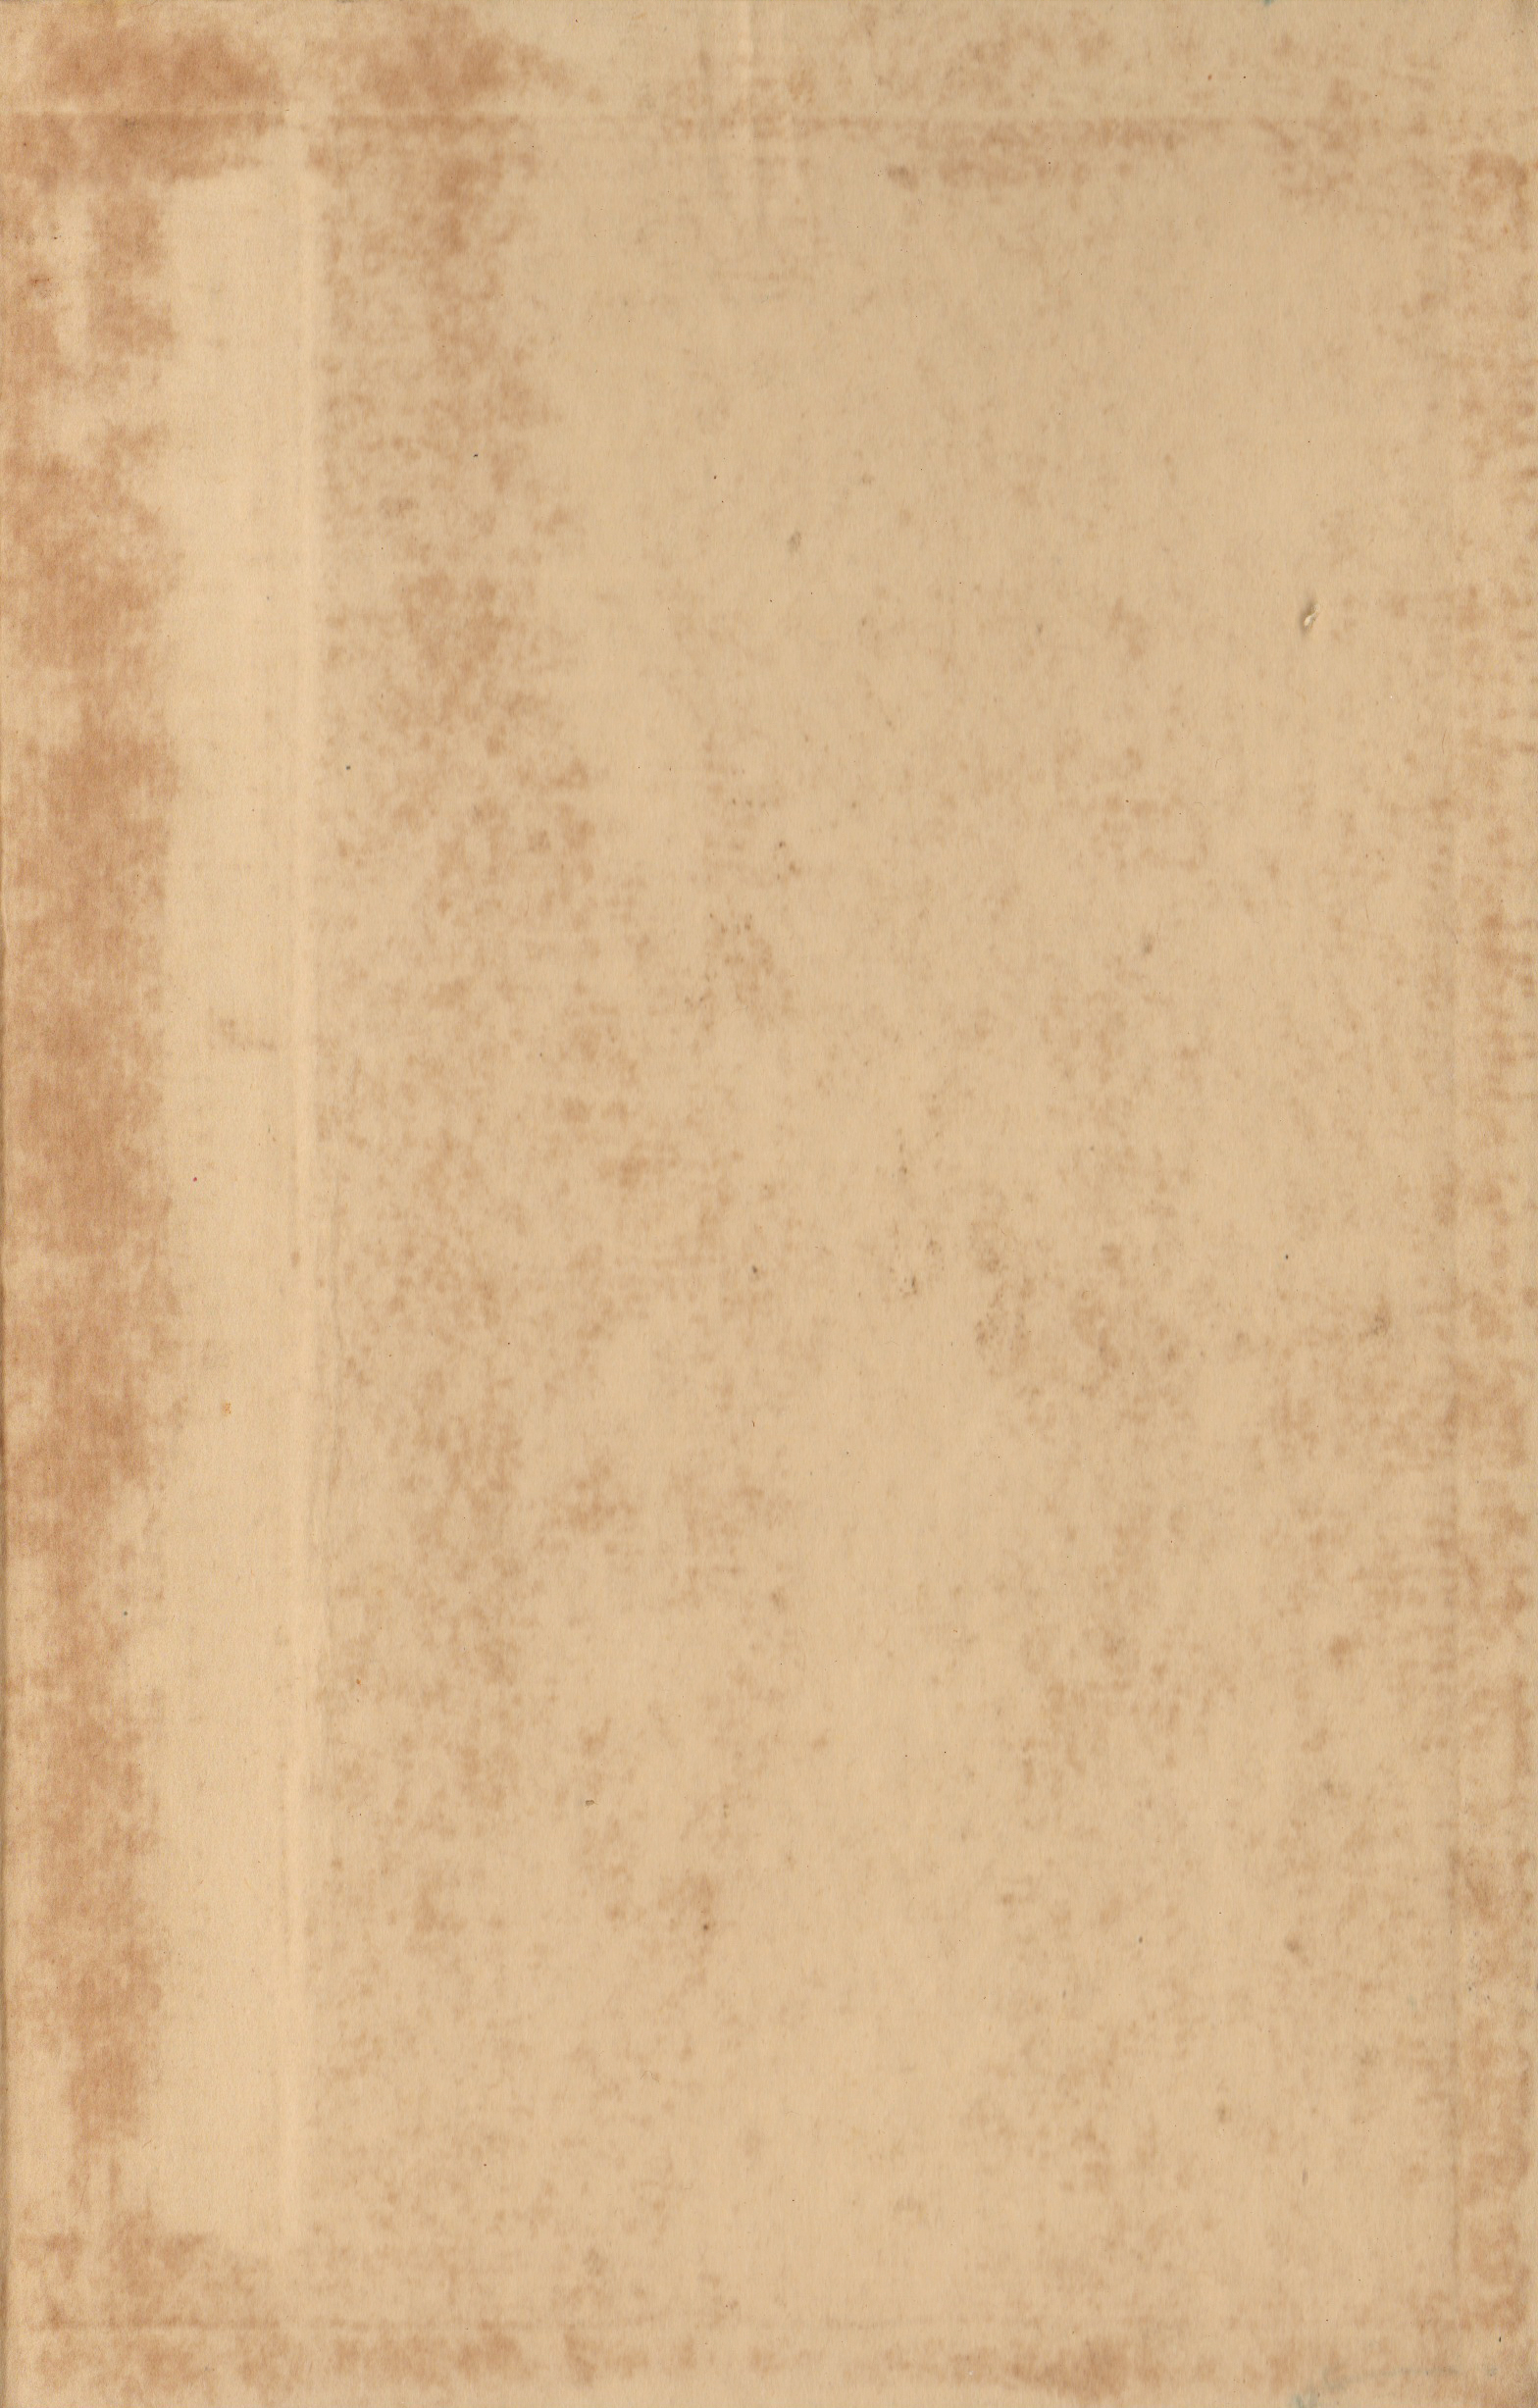 Dirty vintage paper texture photo